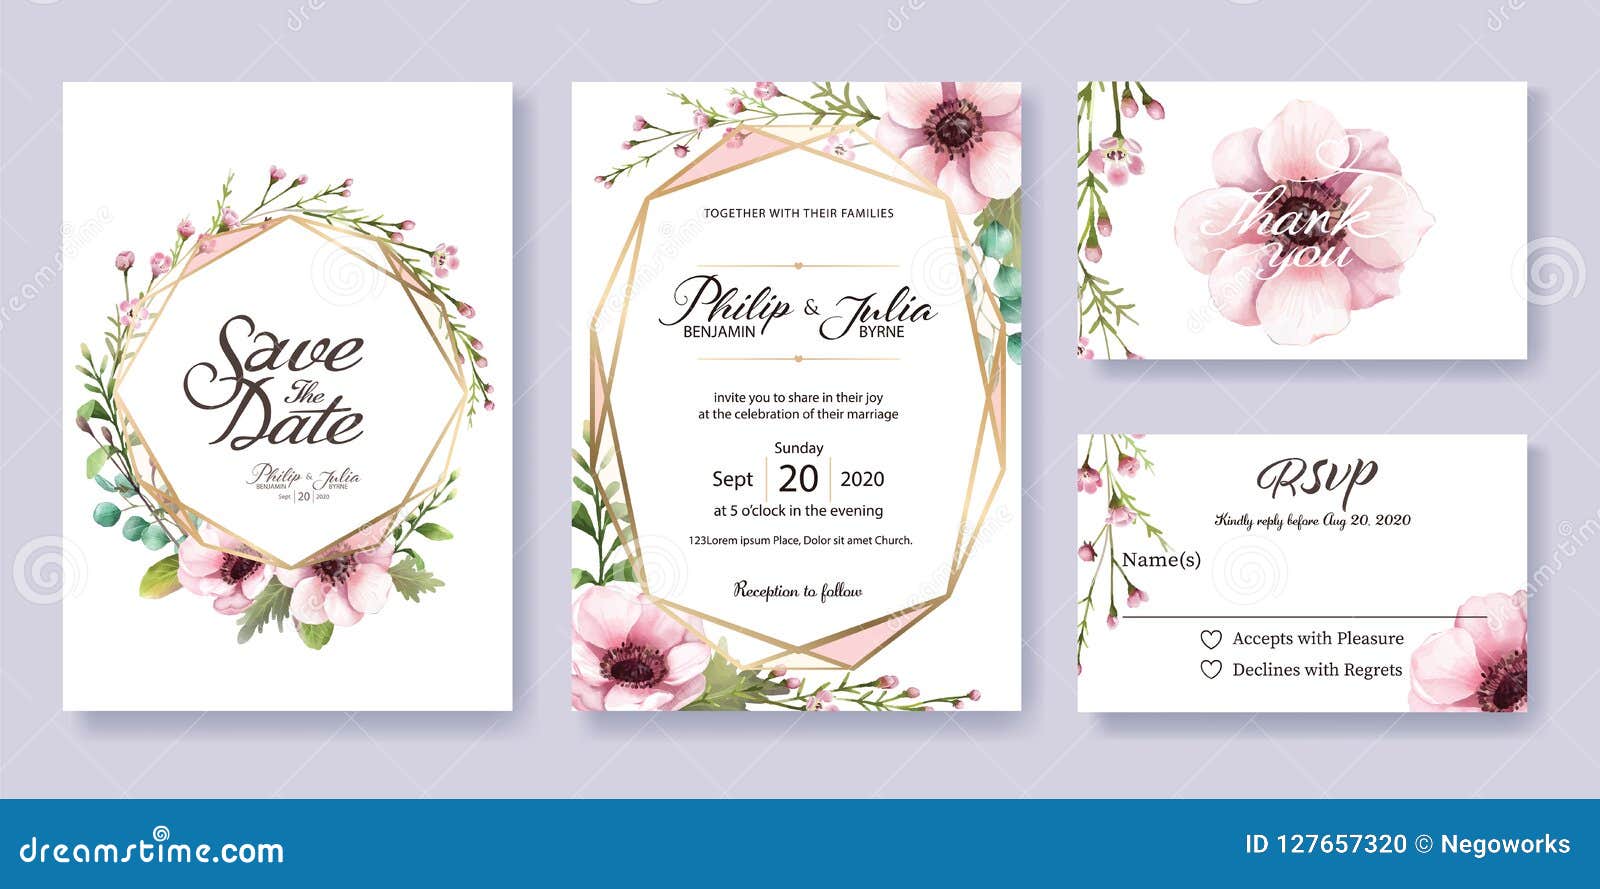 wedding invitation, save the date, thank you, rsvp card template